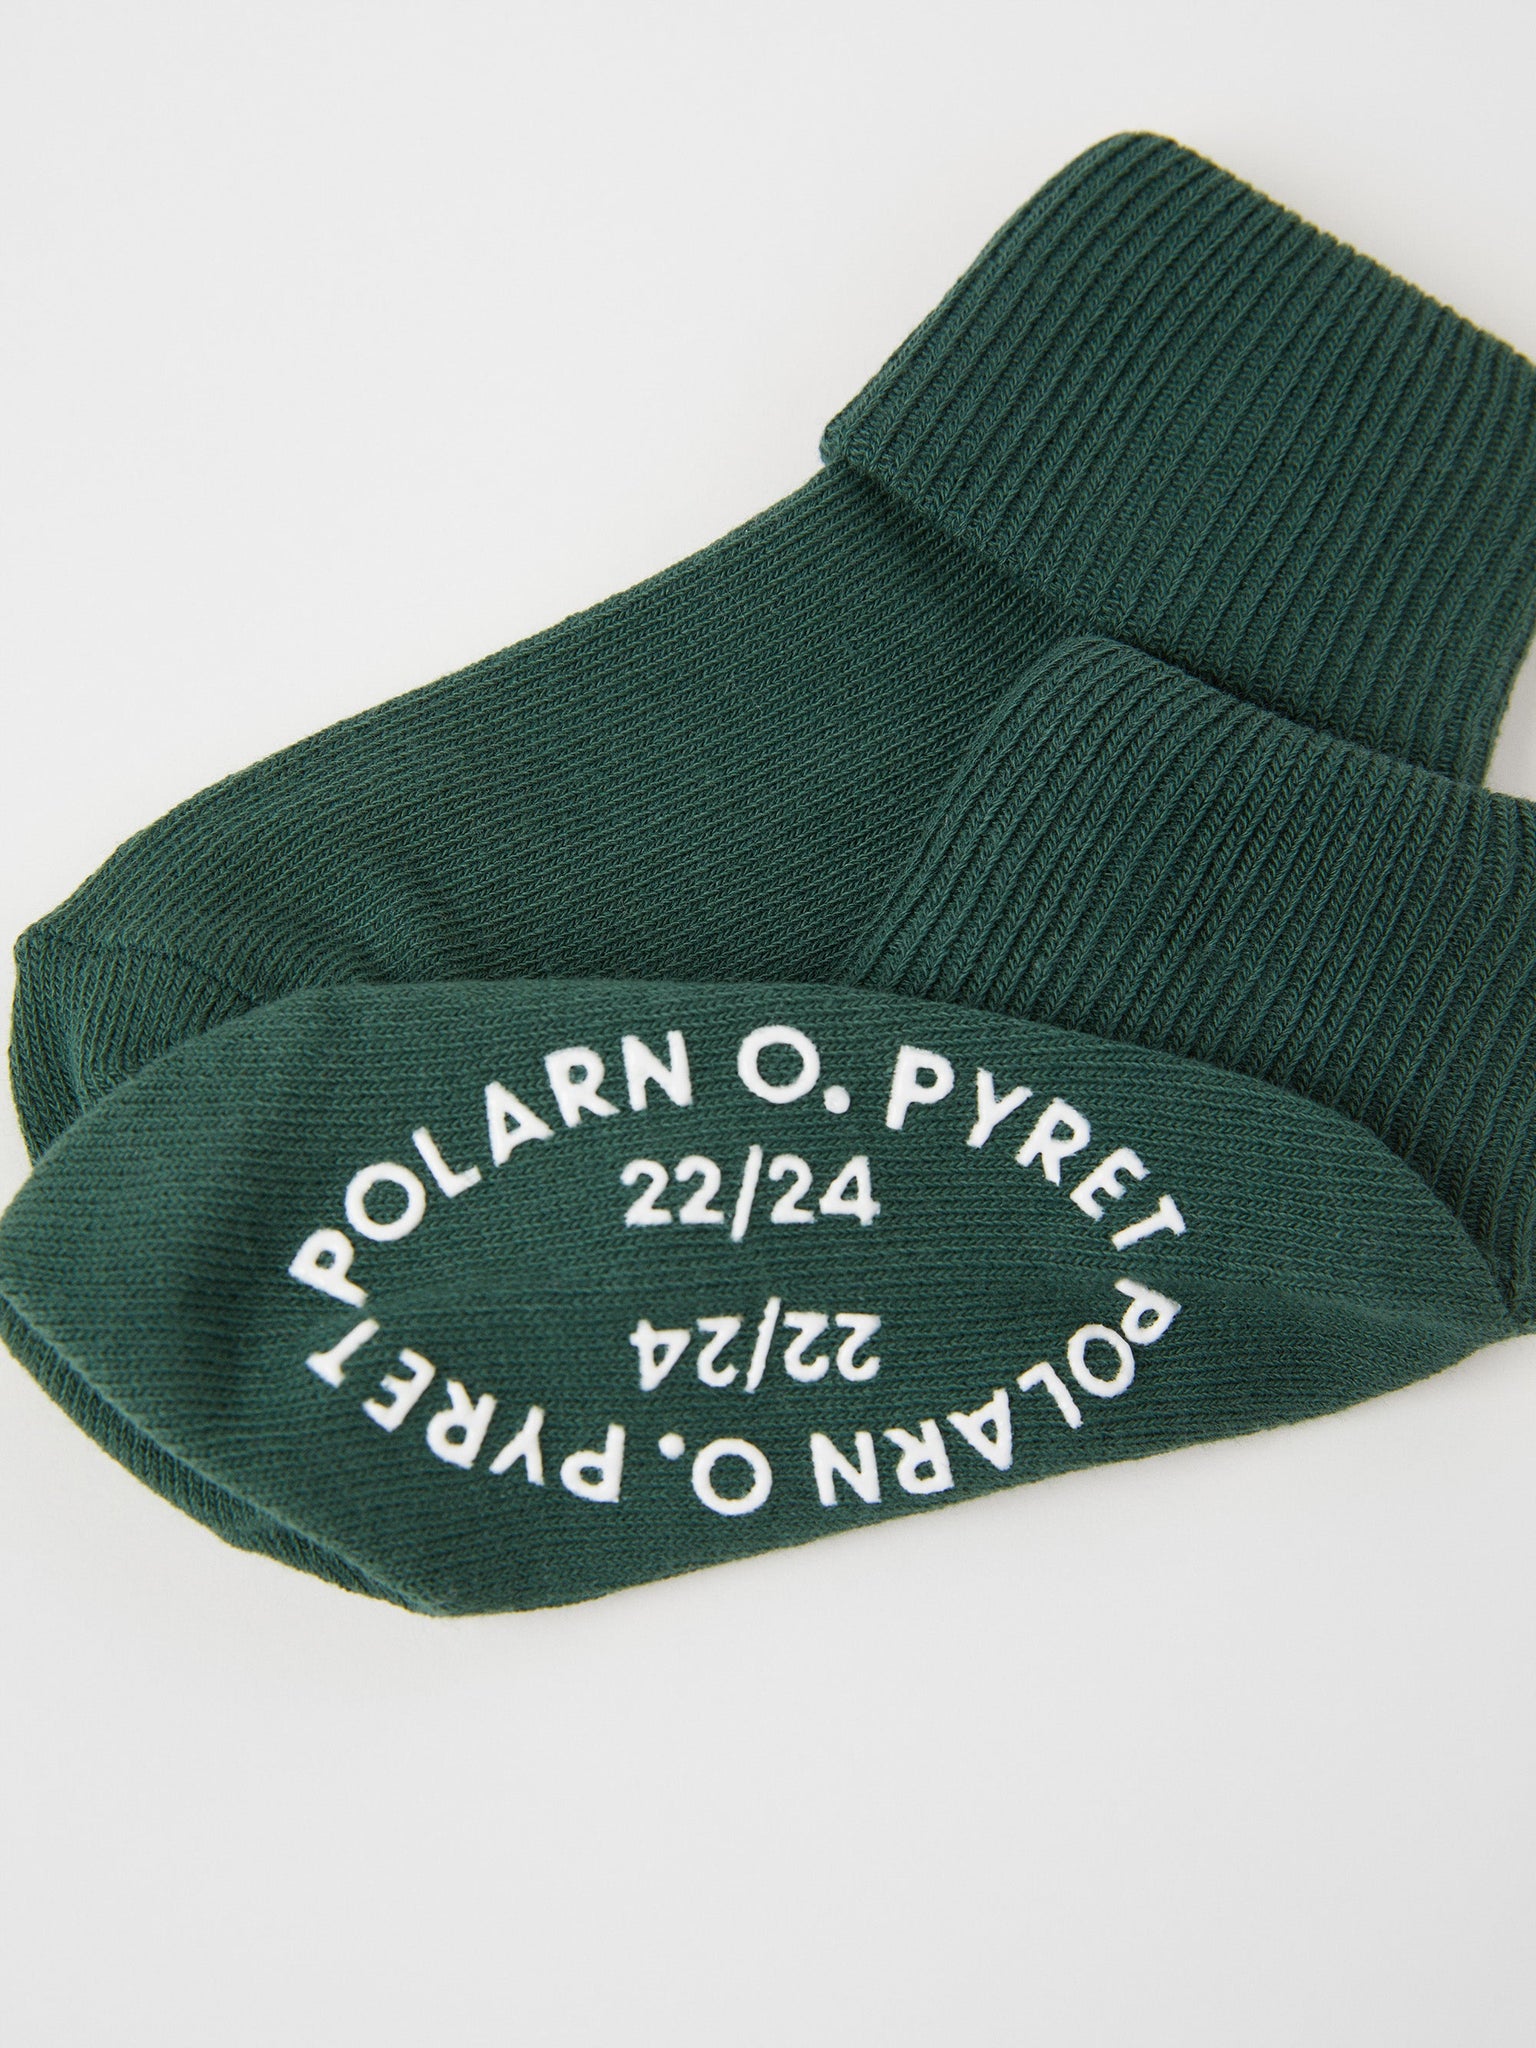 Cotton Antislip Kids Socks Multipack from the Polarn O. Pyret kids collection. Clothes made using sustainably sourced materials.